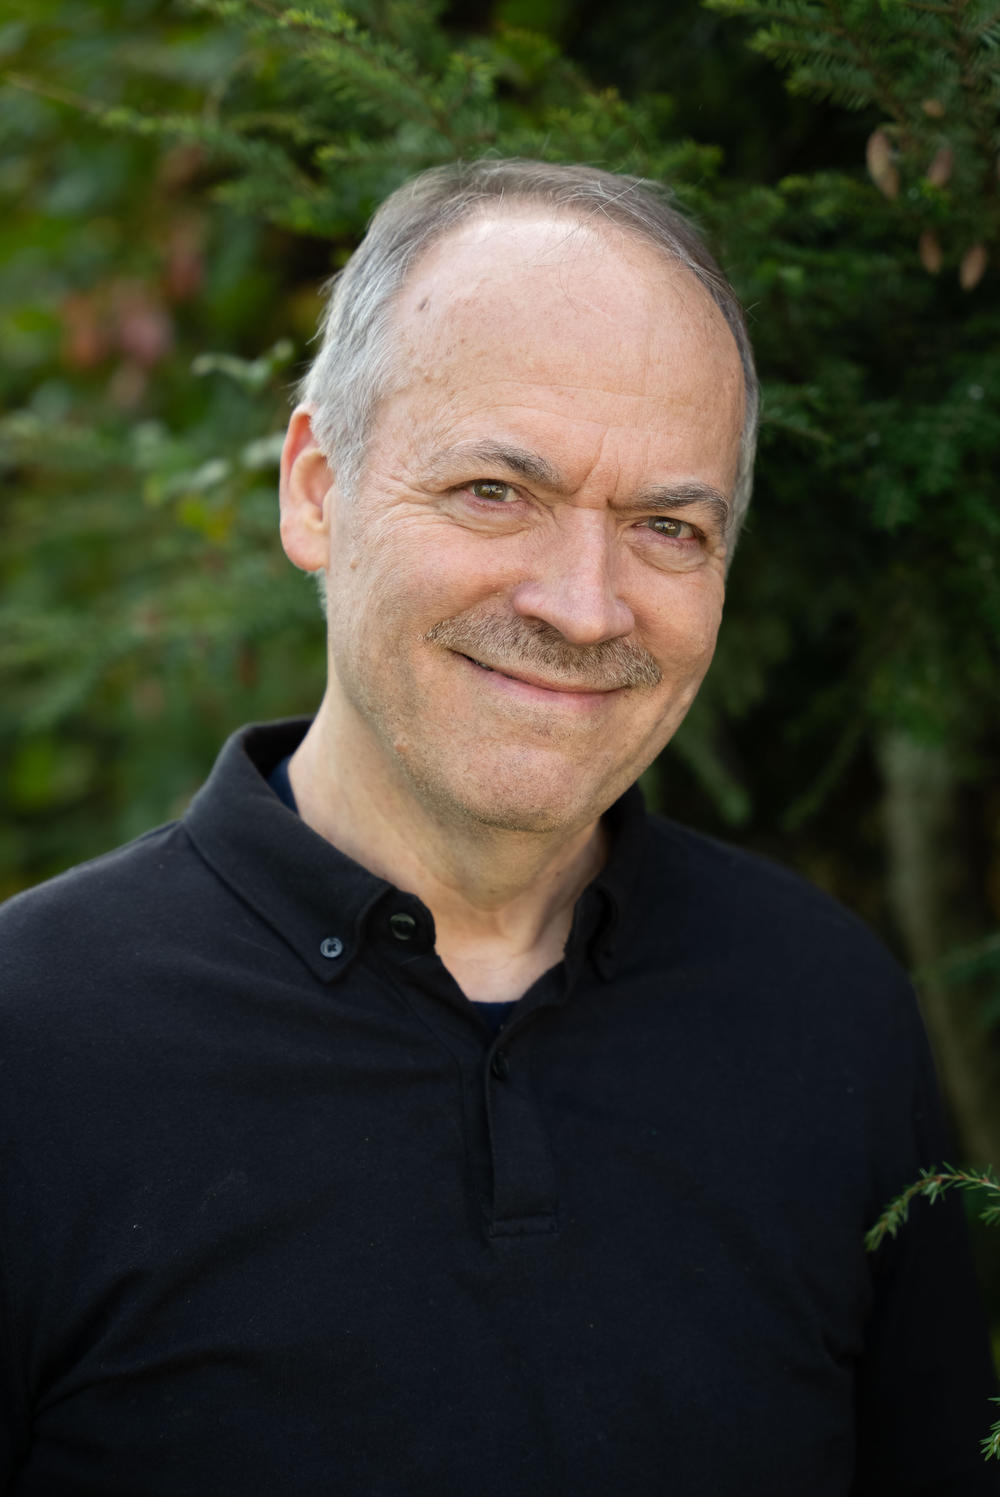 Will Shortz outside his home in Pleasantville, N.Y., where he lives with his partner. The couple met at the table tennis club, where they later got married.